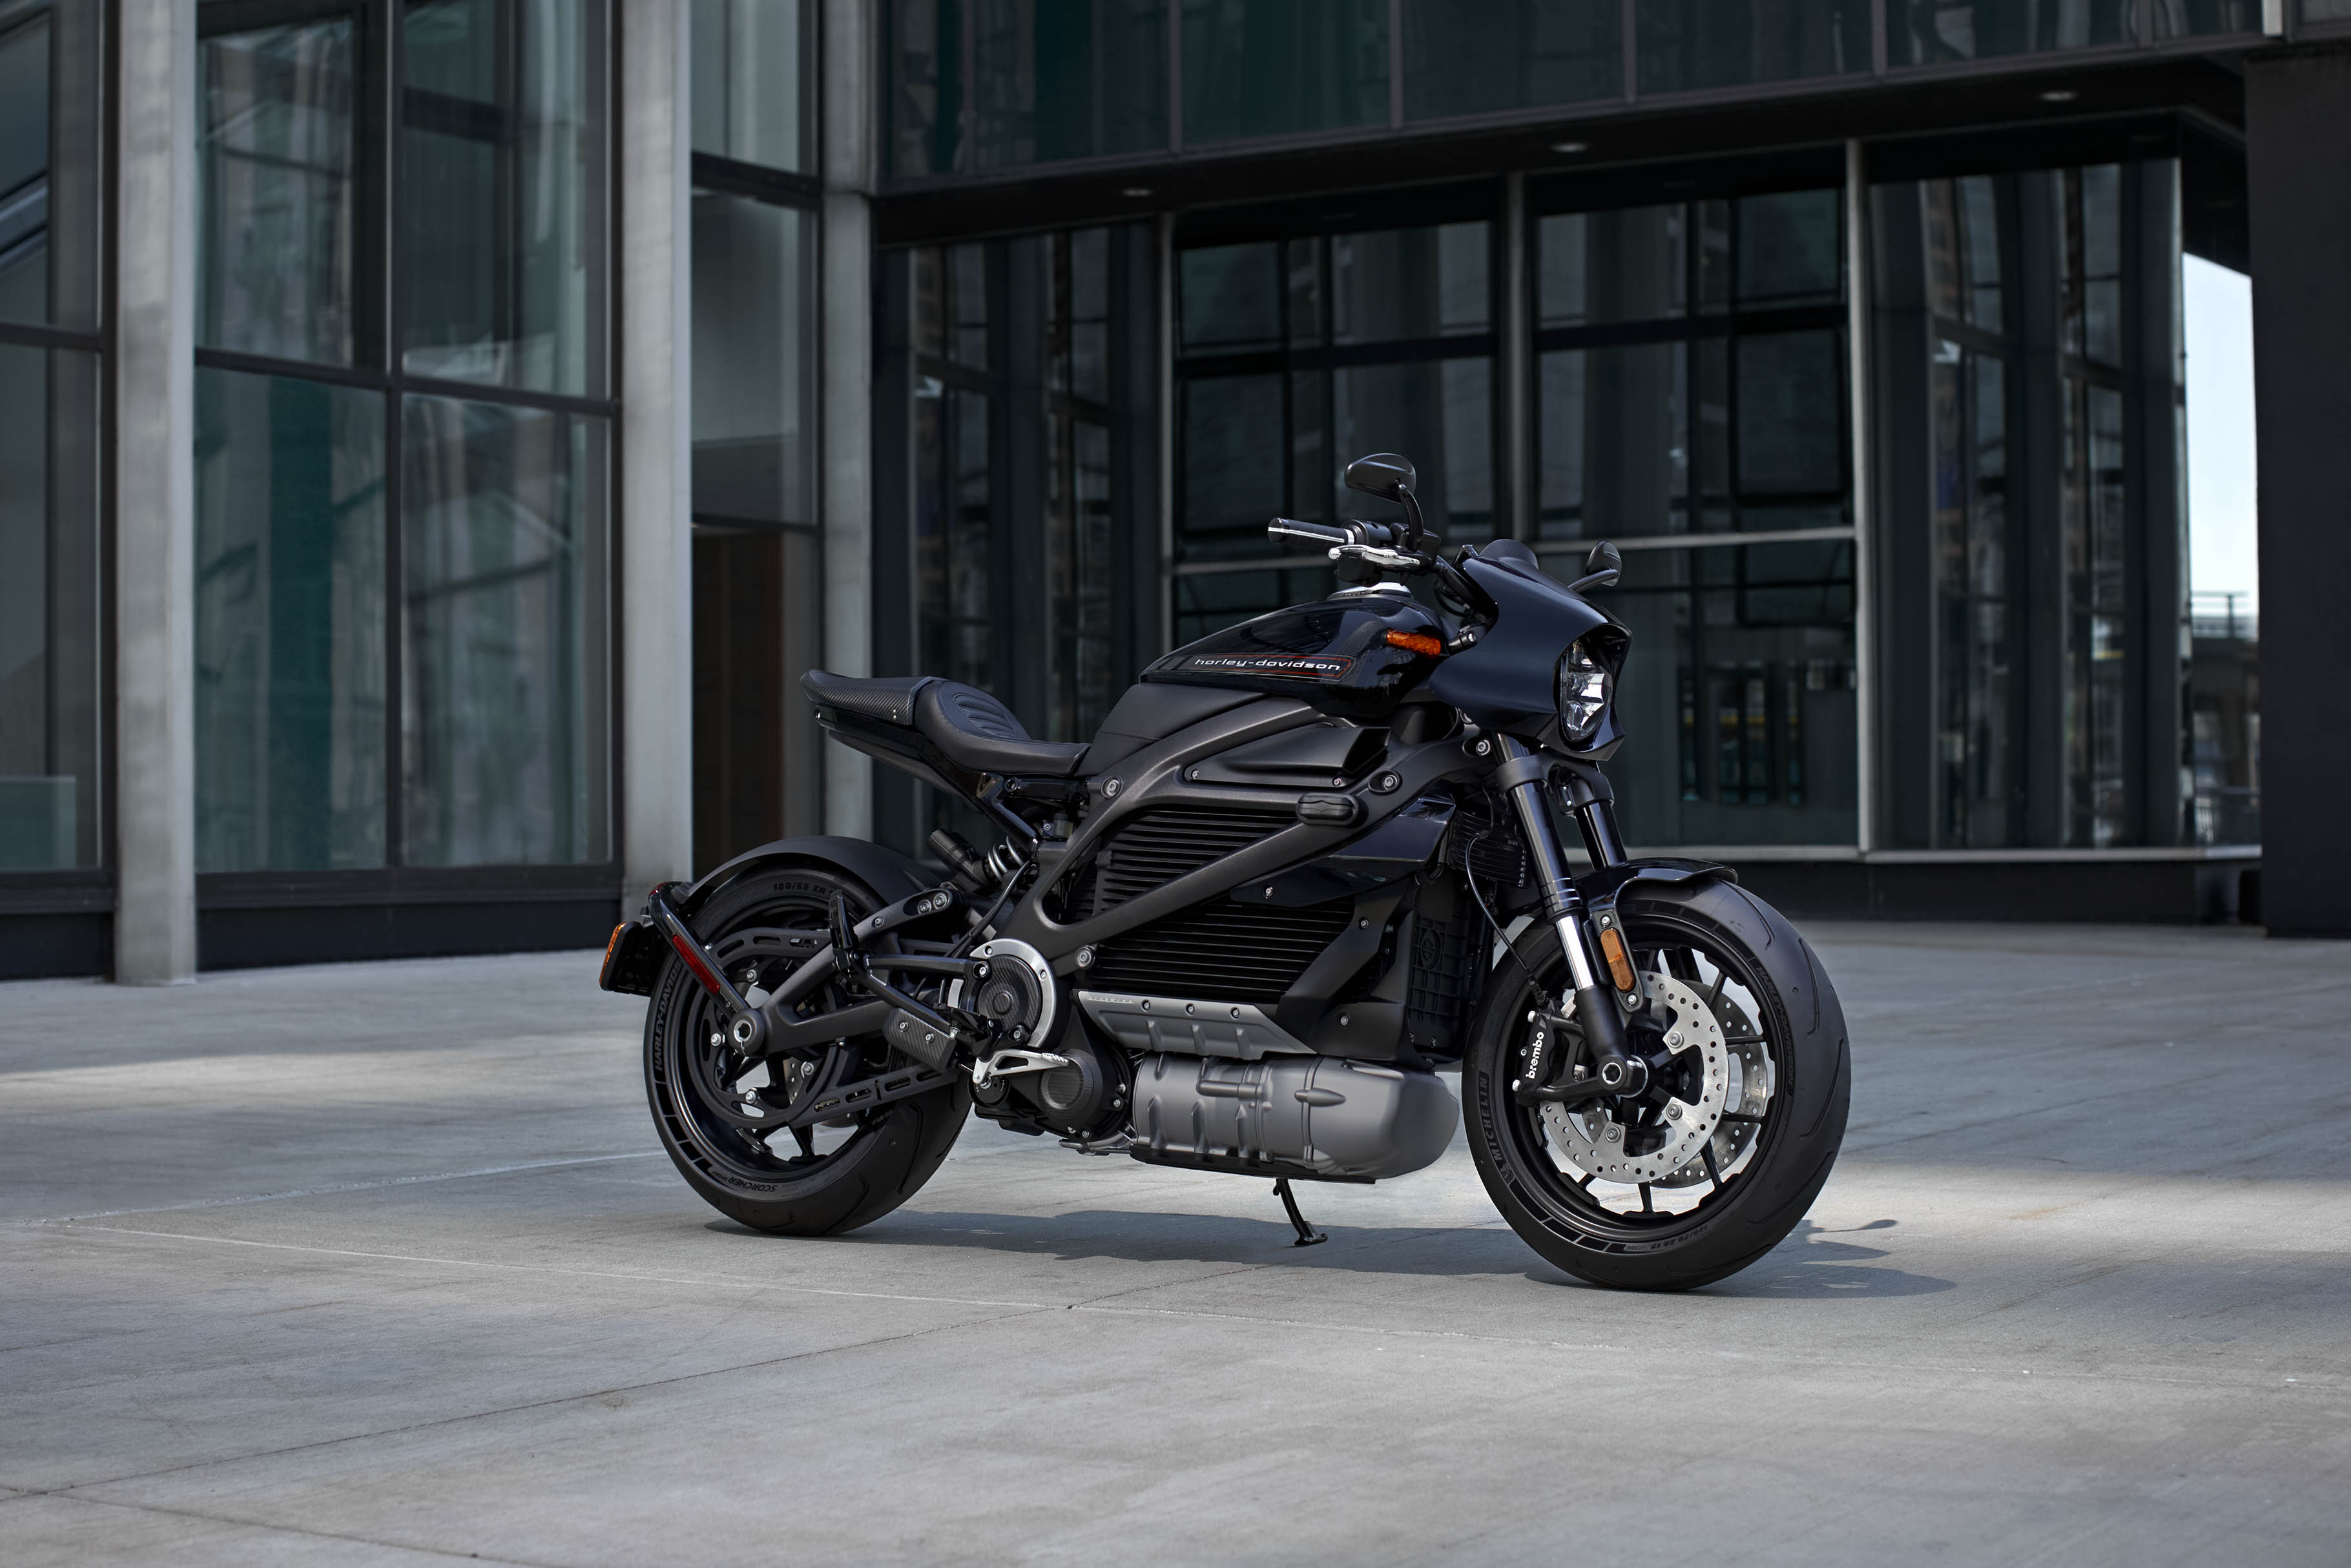 2020 LiveWire Electric Motorcycle Harley Davidson USA